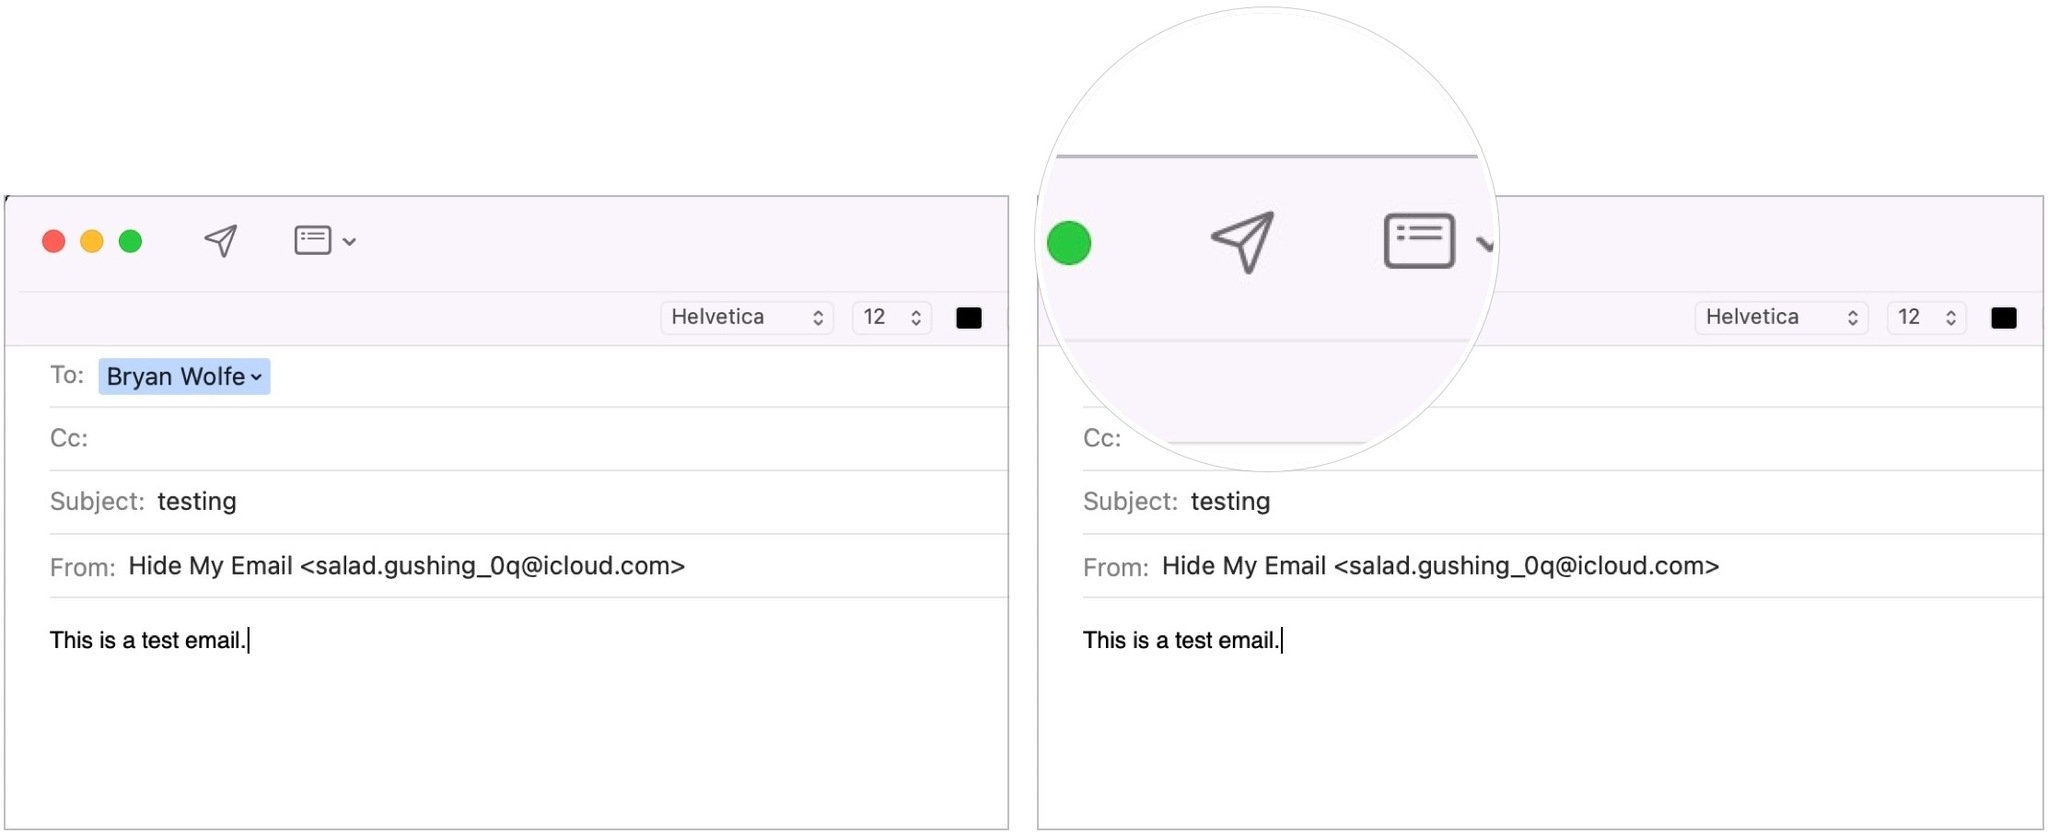 To create a new random email through the Mail application, compose the email as usual, then click the Send button.